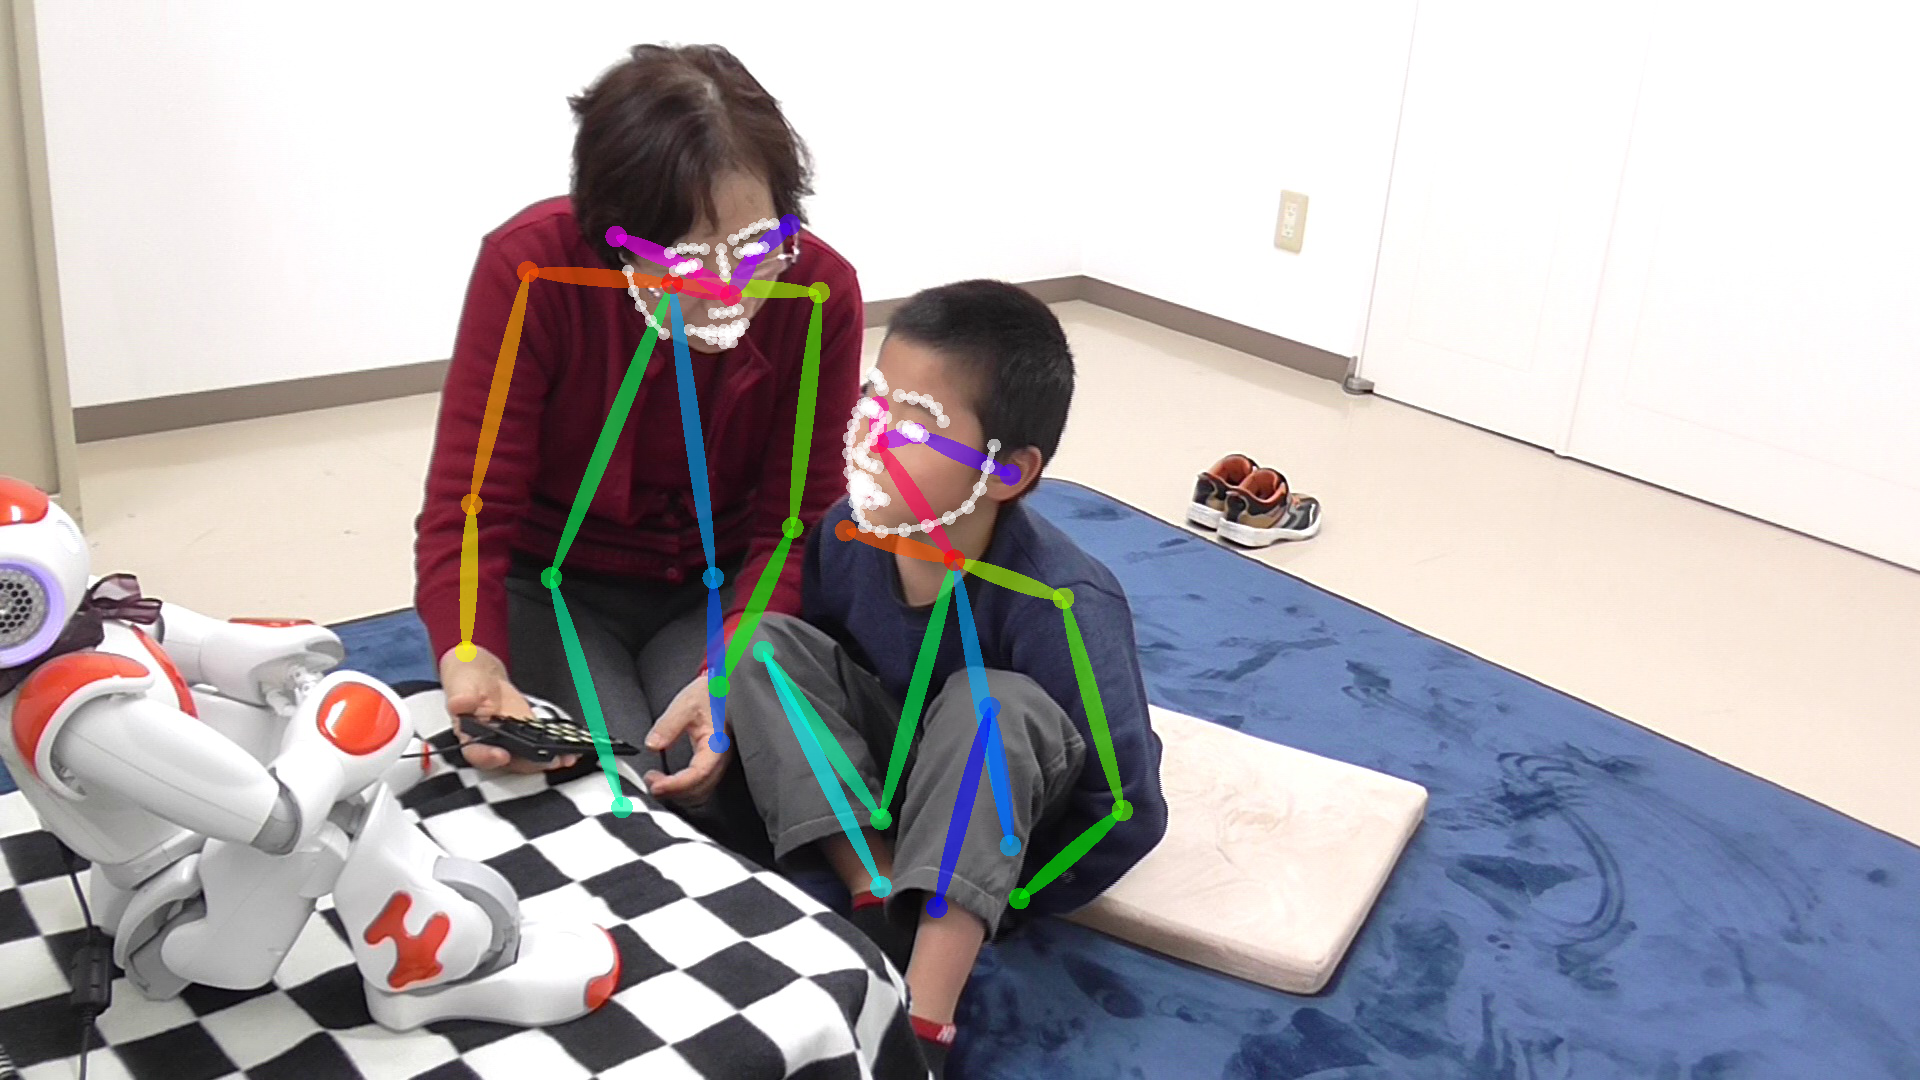 Game-U Teaches Children How To Build Their Own Video Games And Robots